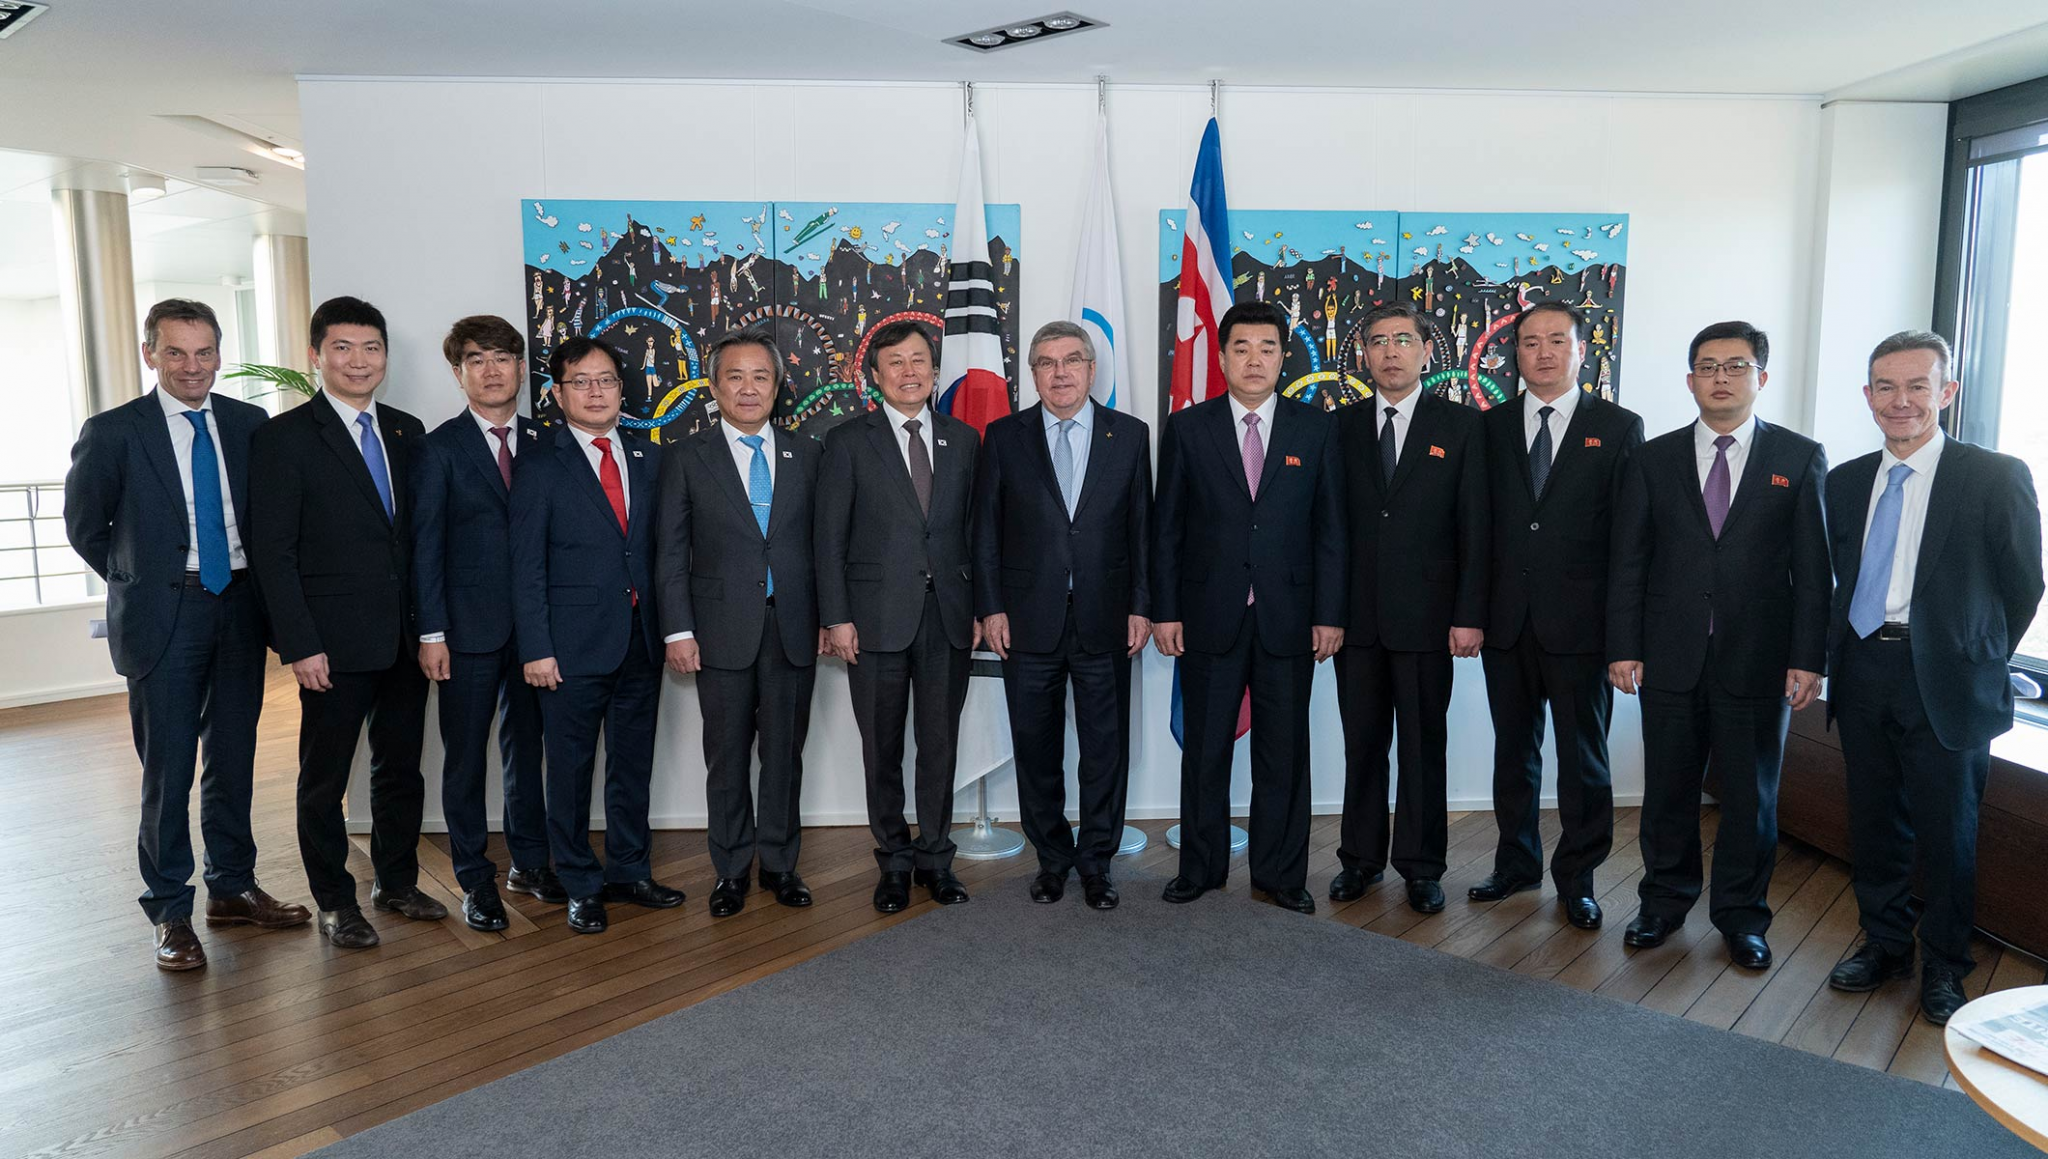 Officials from North and South Korea met today with the IOC in Lausanne to discuss working more closely together, including on a bid for the 2032 Olympic and Paralympic Games ©IOC